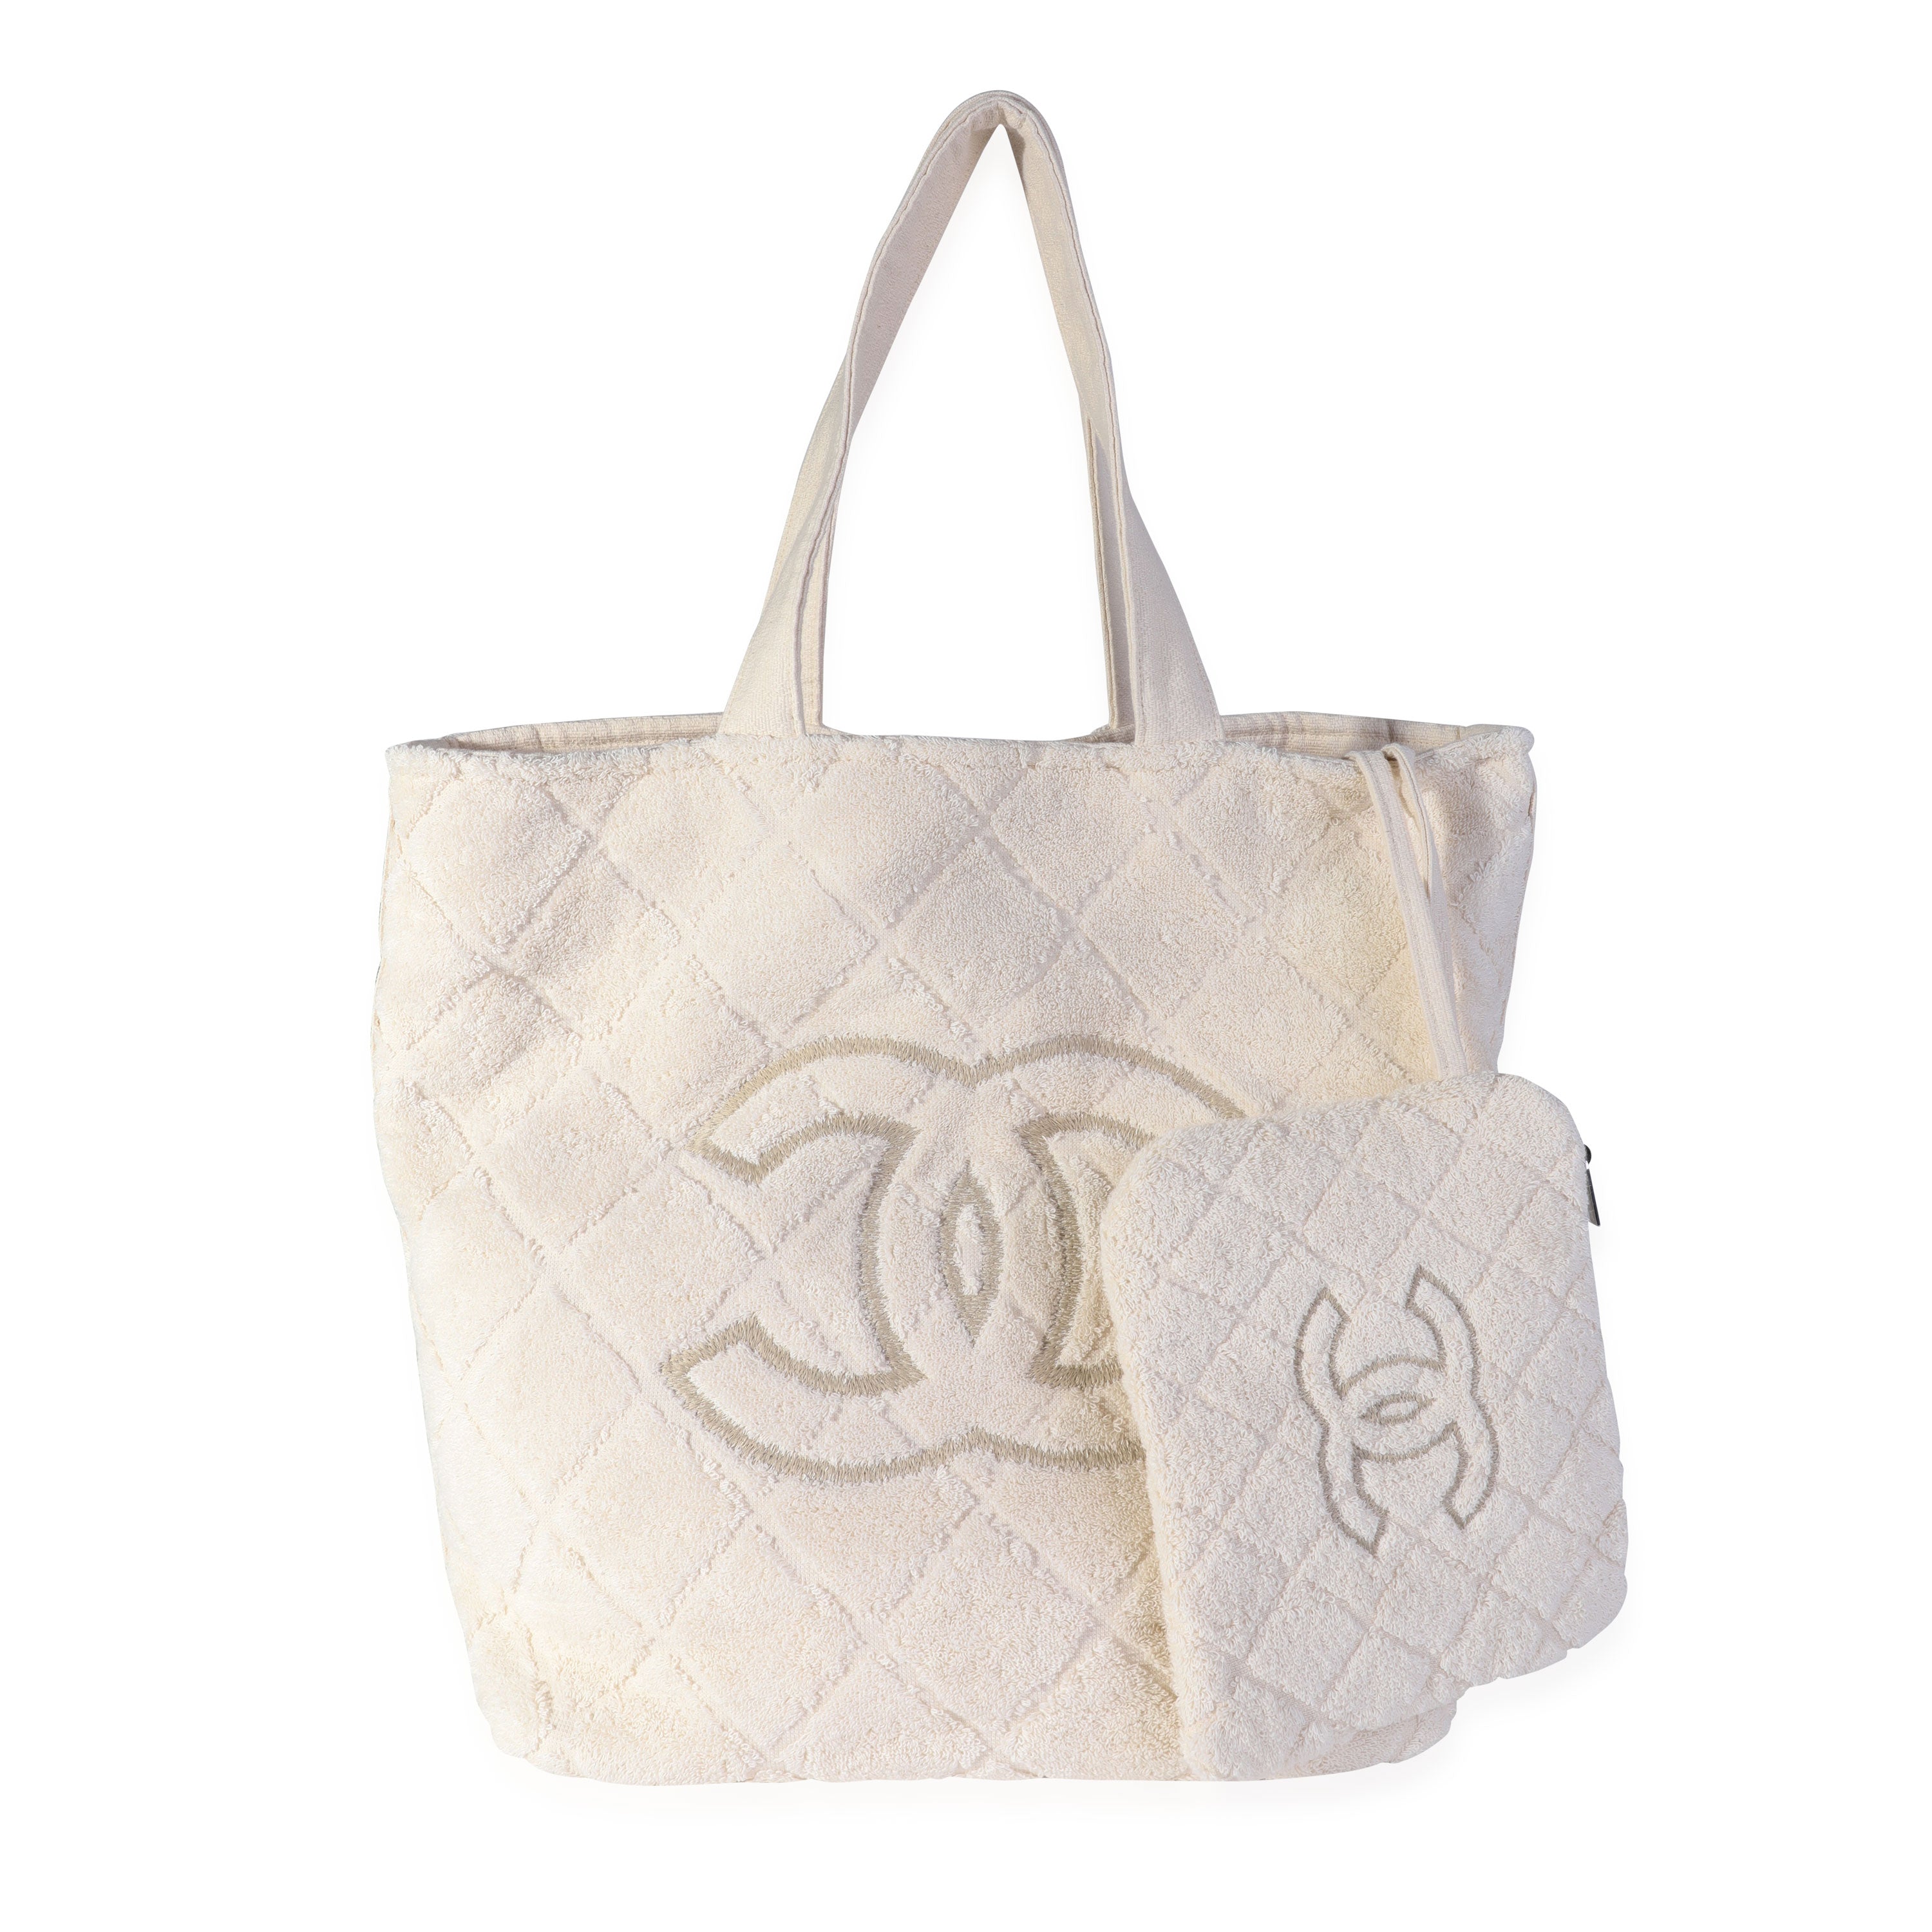 Chanel Coco Beach Tote Navy Terry Cloth with Towel/Pouch – Madison